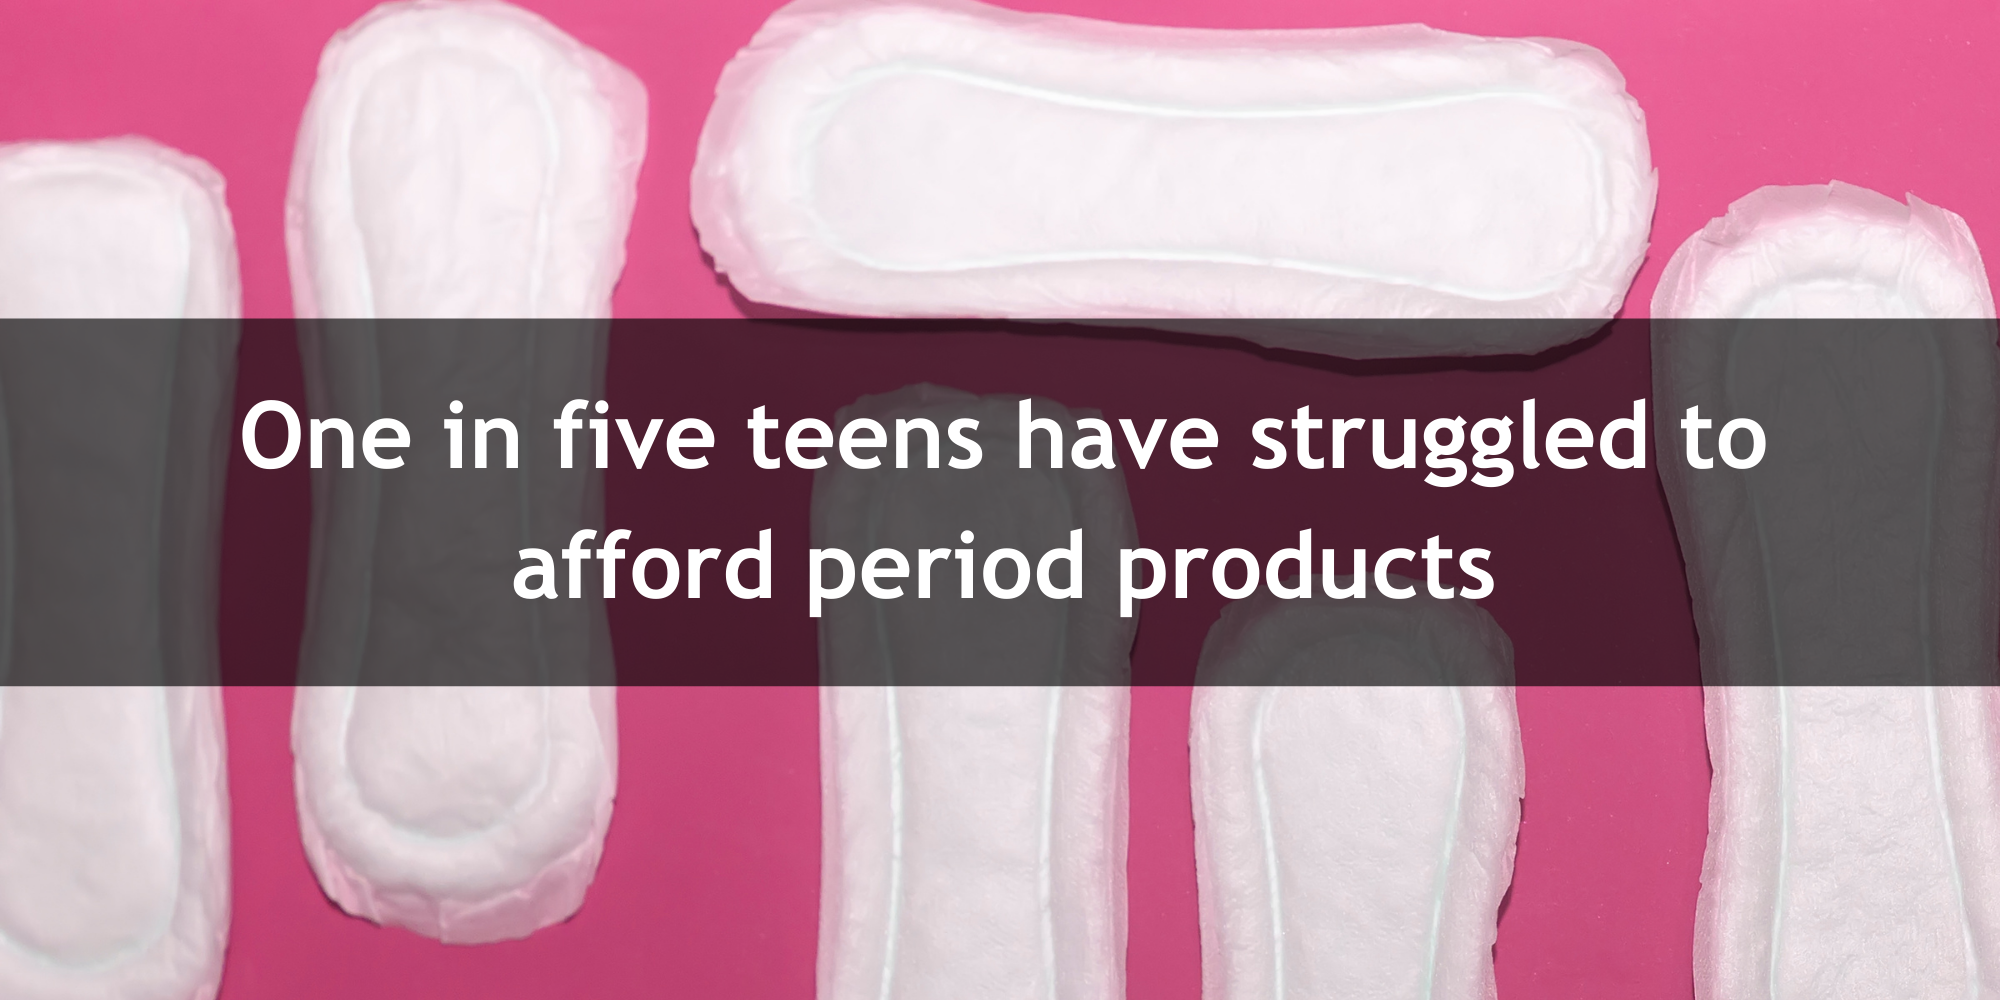 A bold plan to improve access to menstrual products